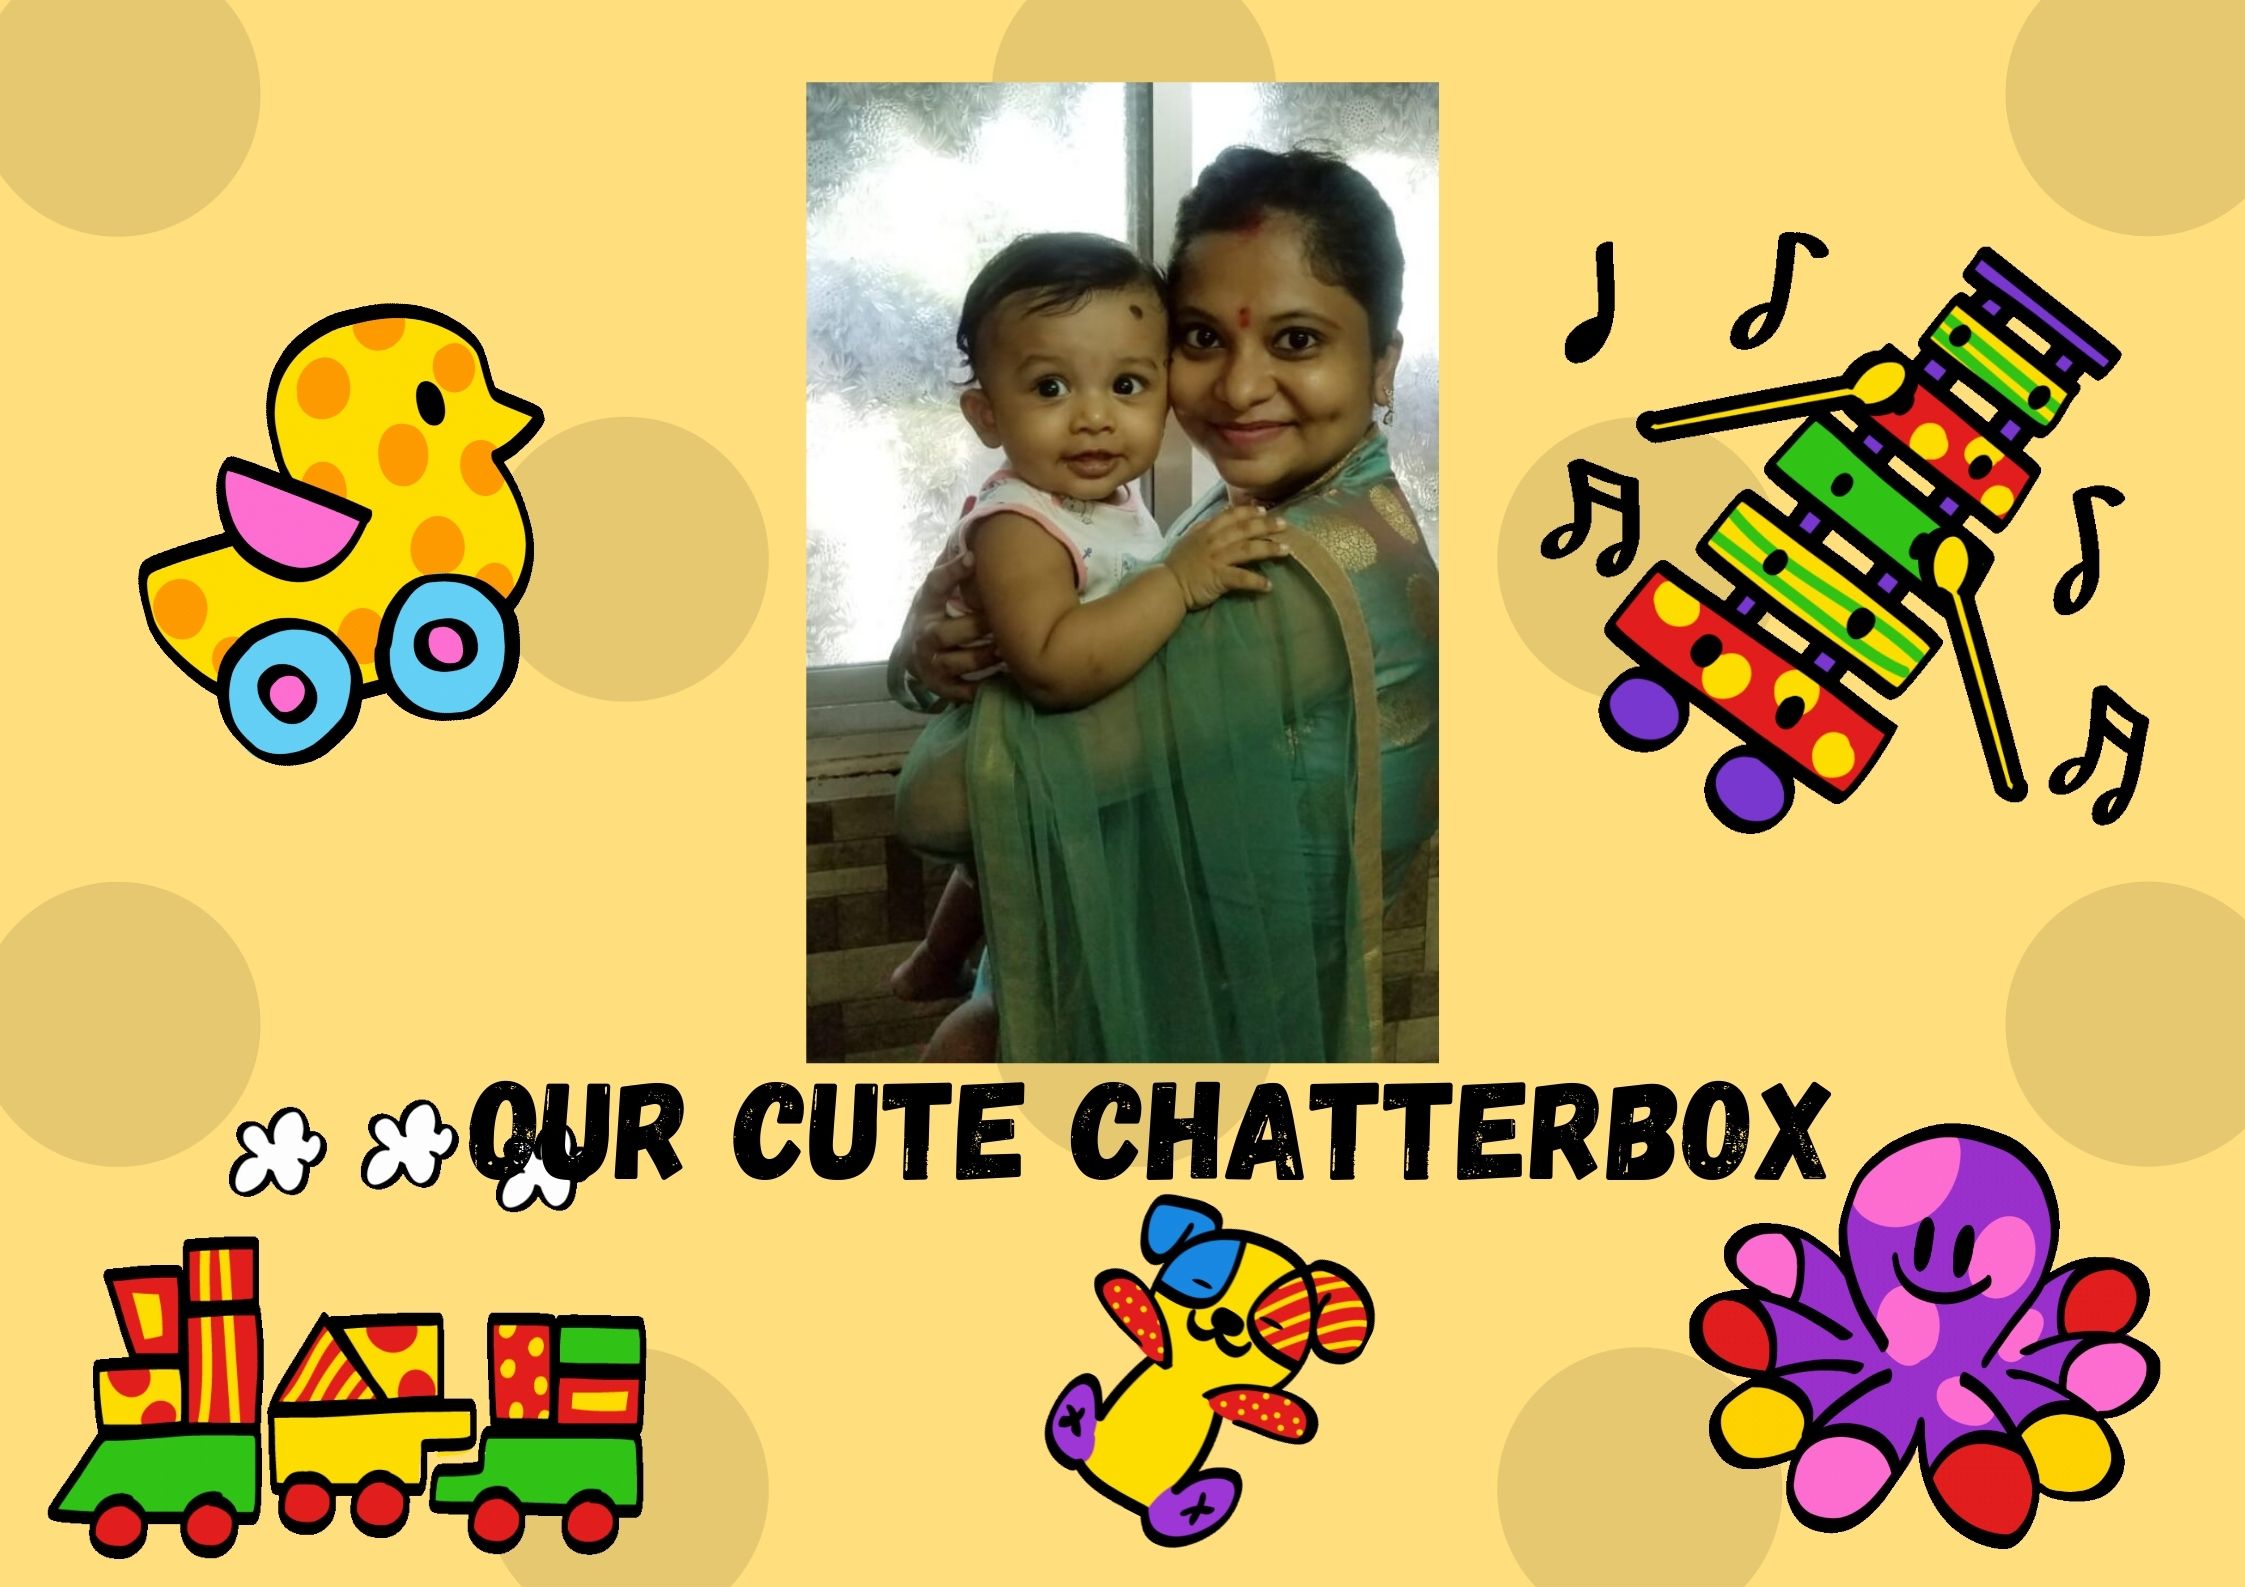 Our Cute Chatterbox